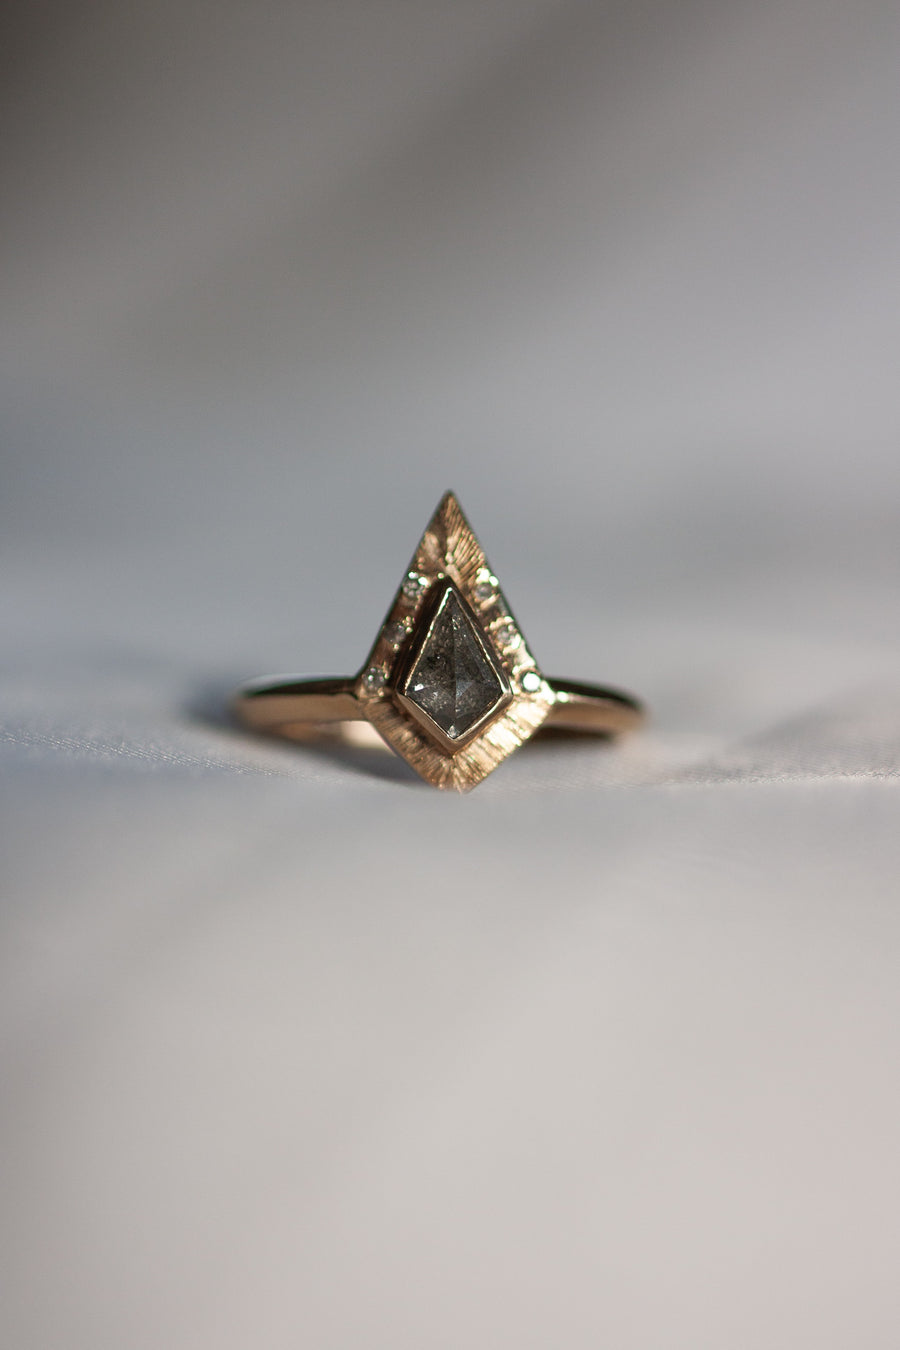 The Endy engagement ring features a stunning kite shaped diamond and intricate hand engraving.